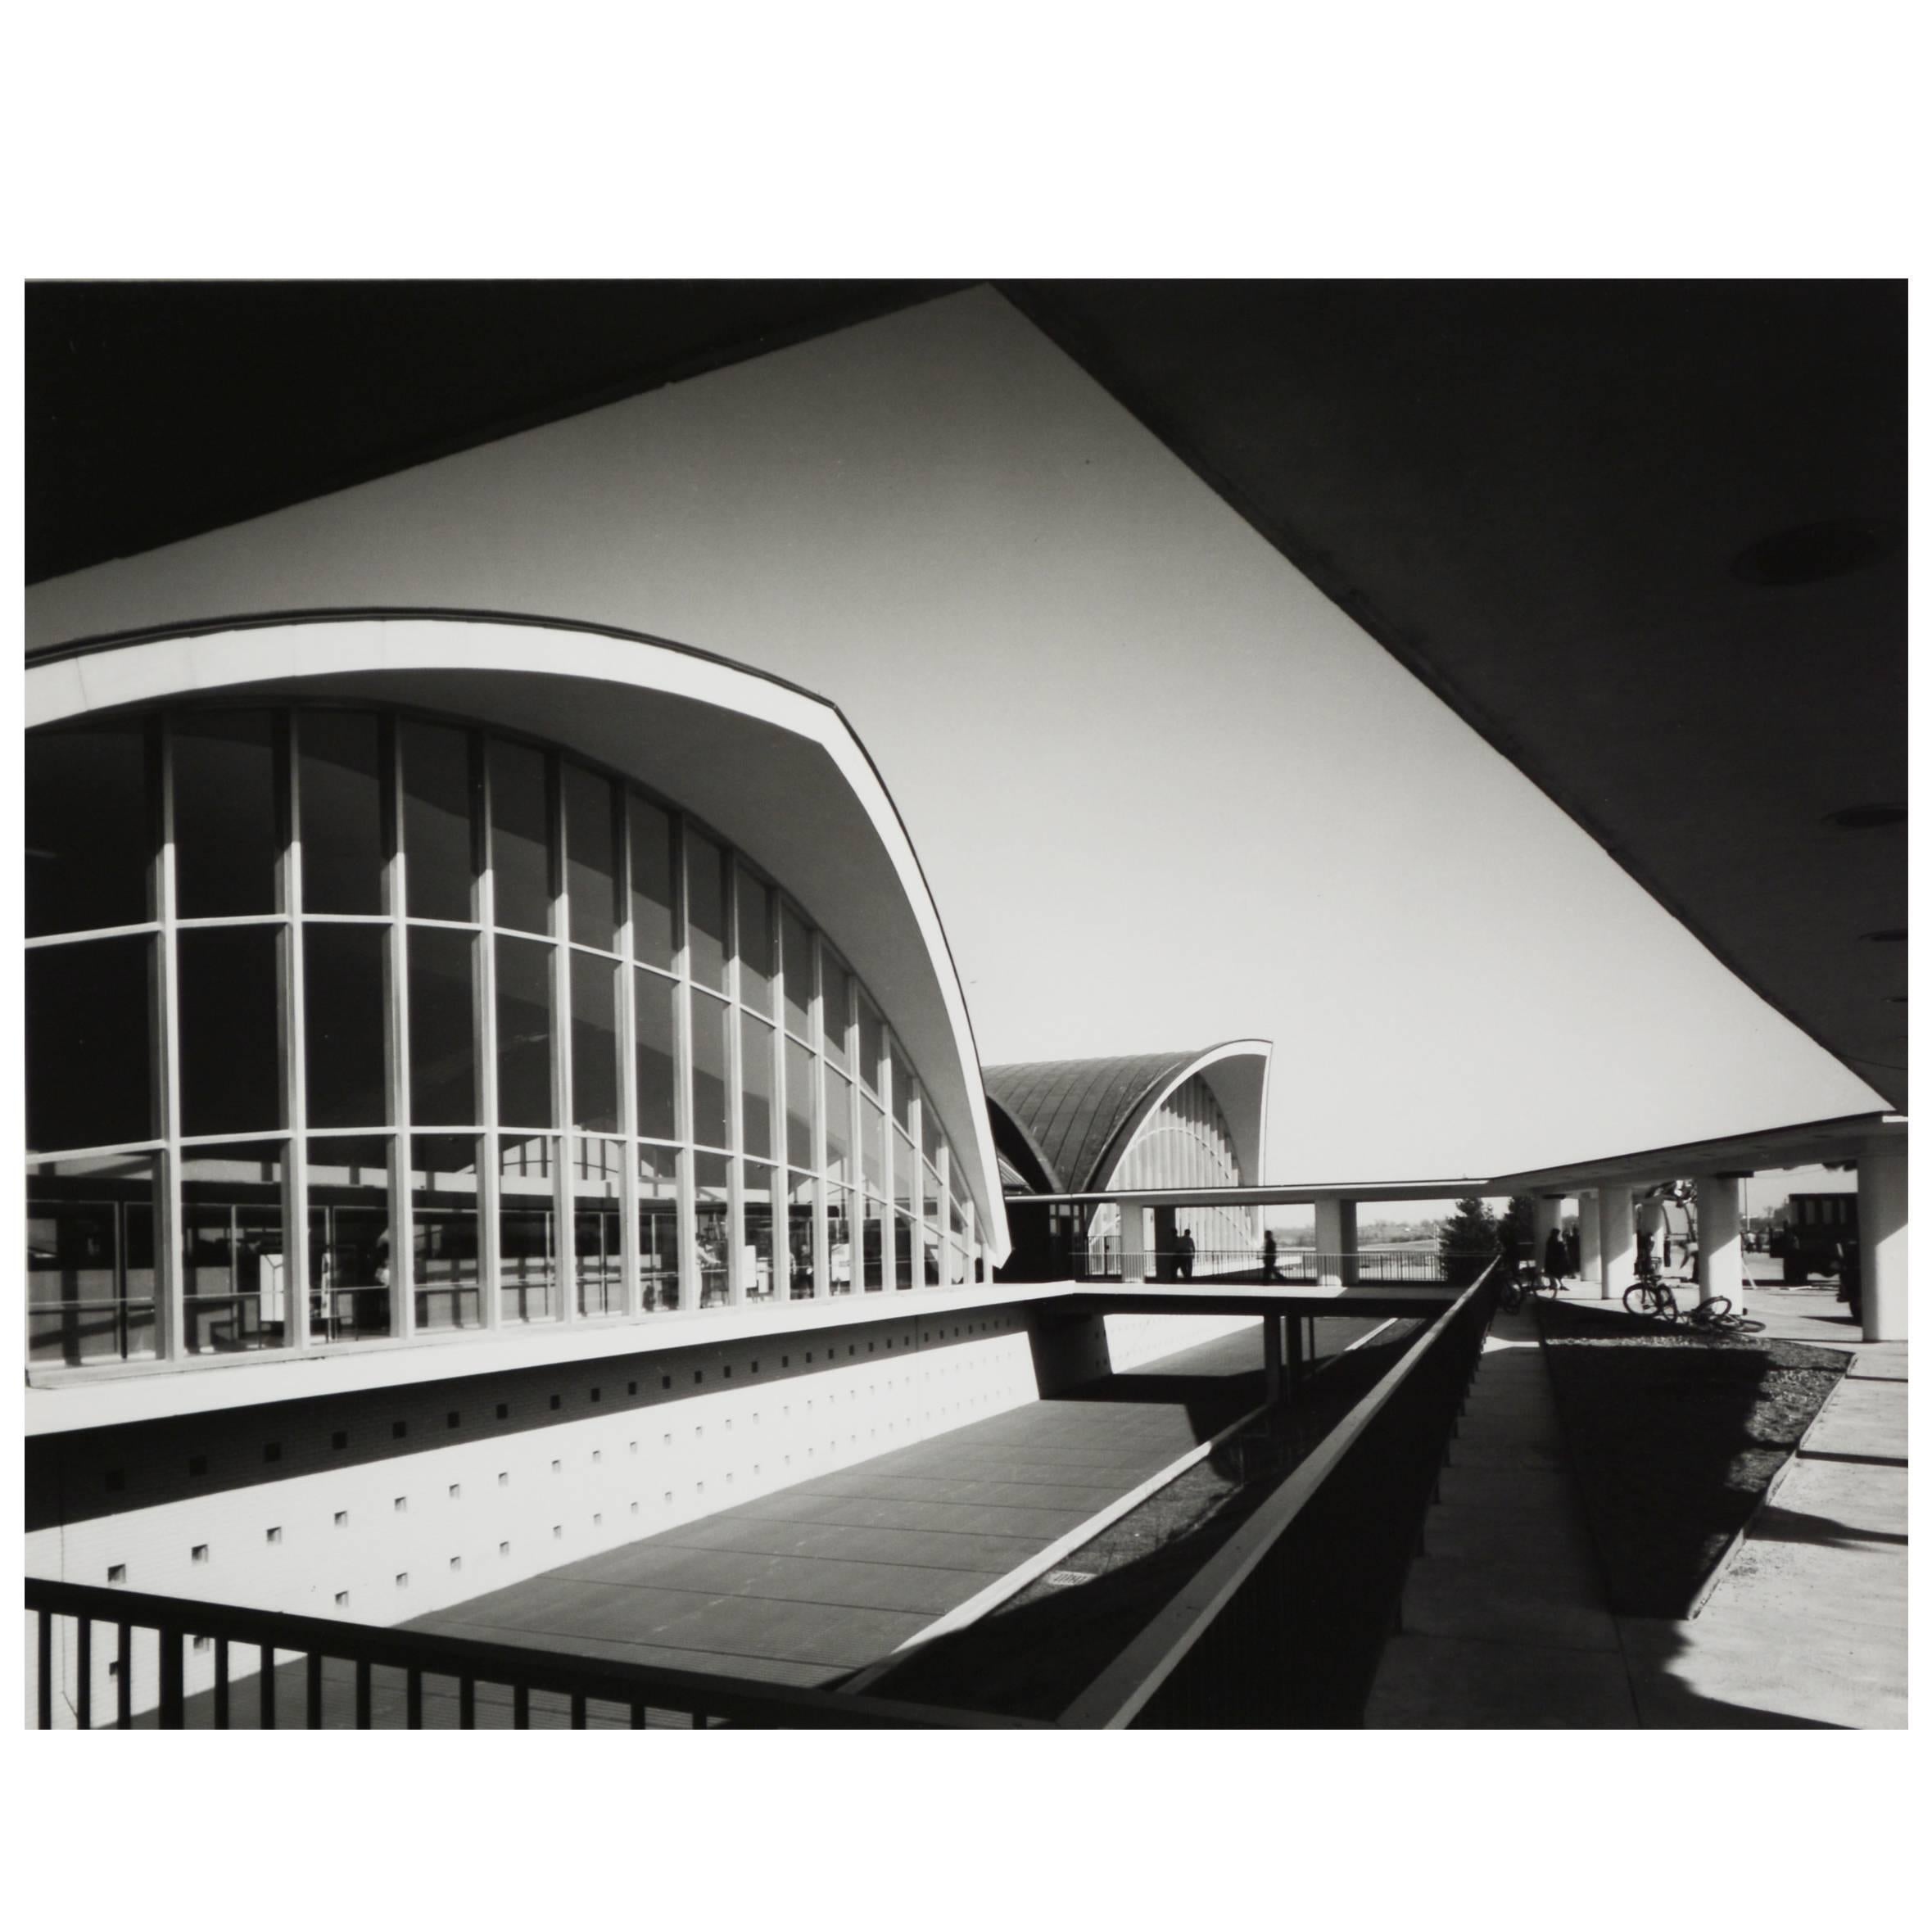 Photograph of the St. Louis International Airport by Ezra Stoller